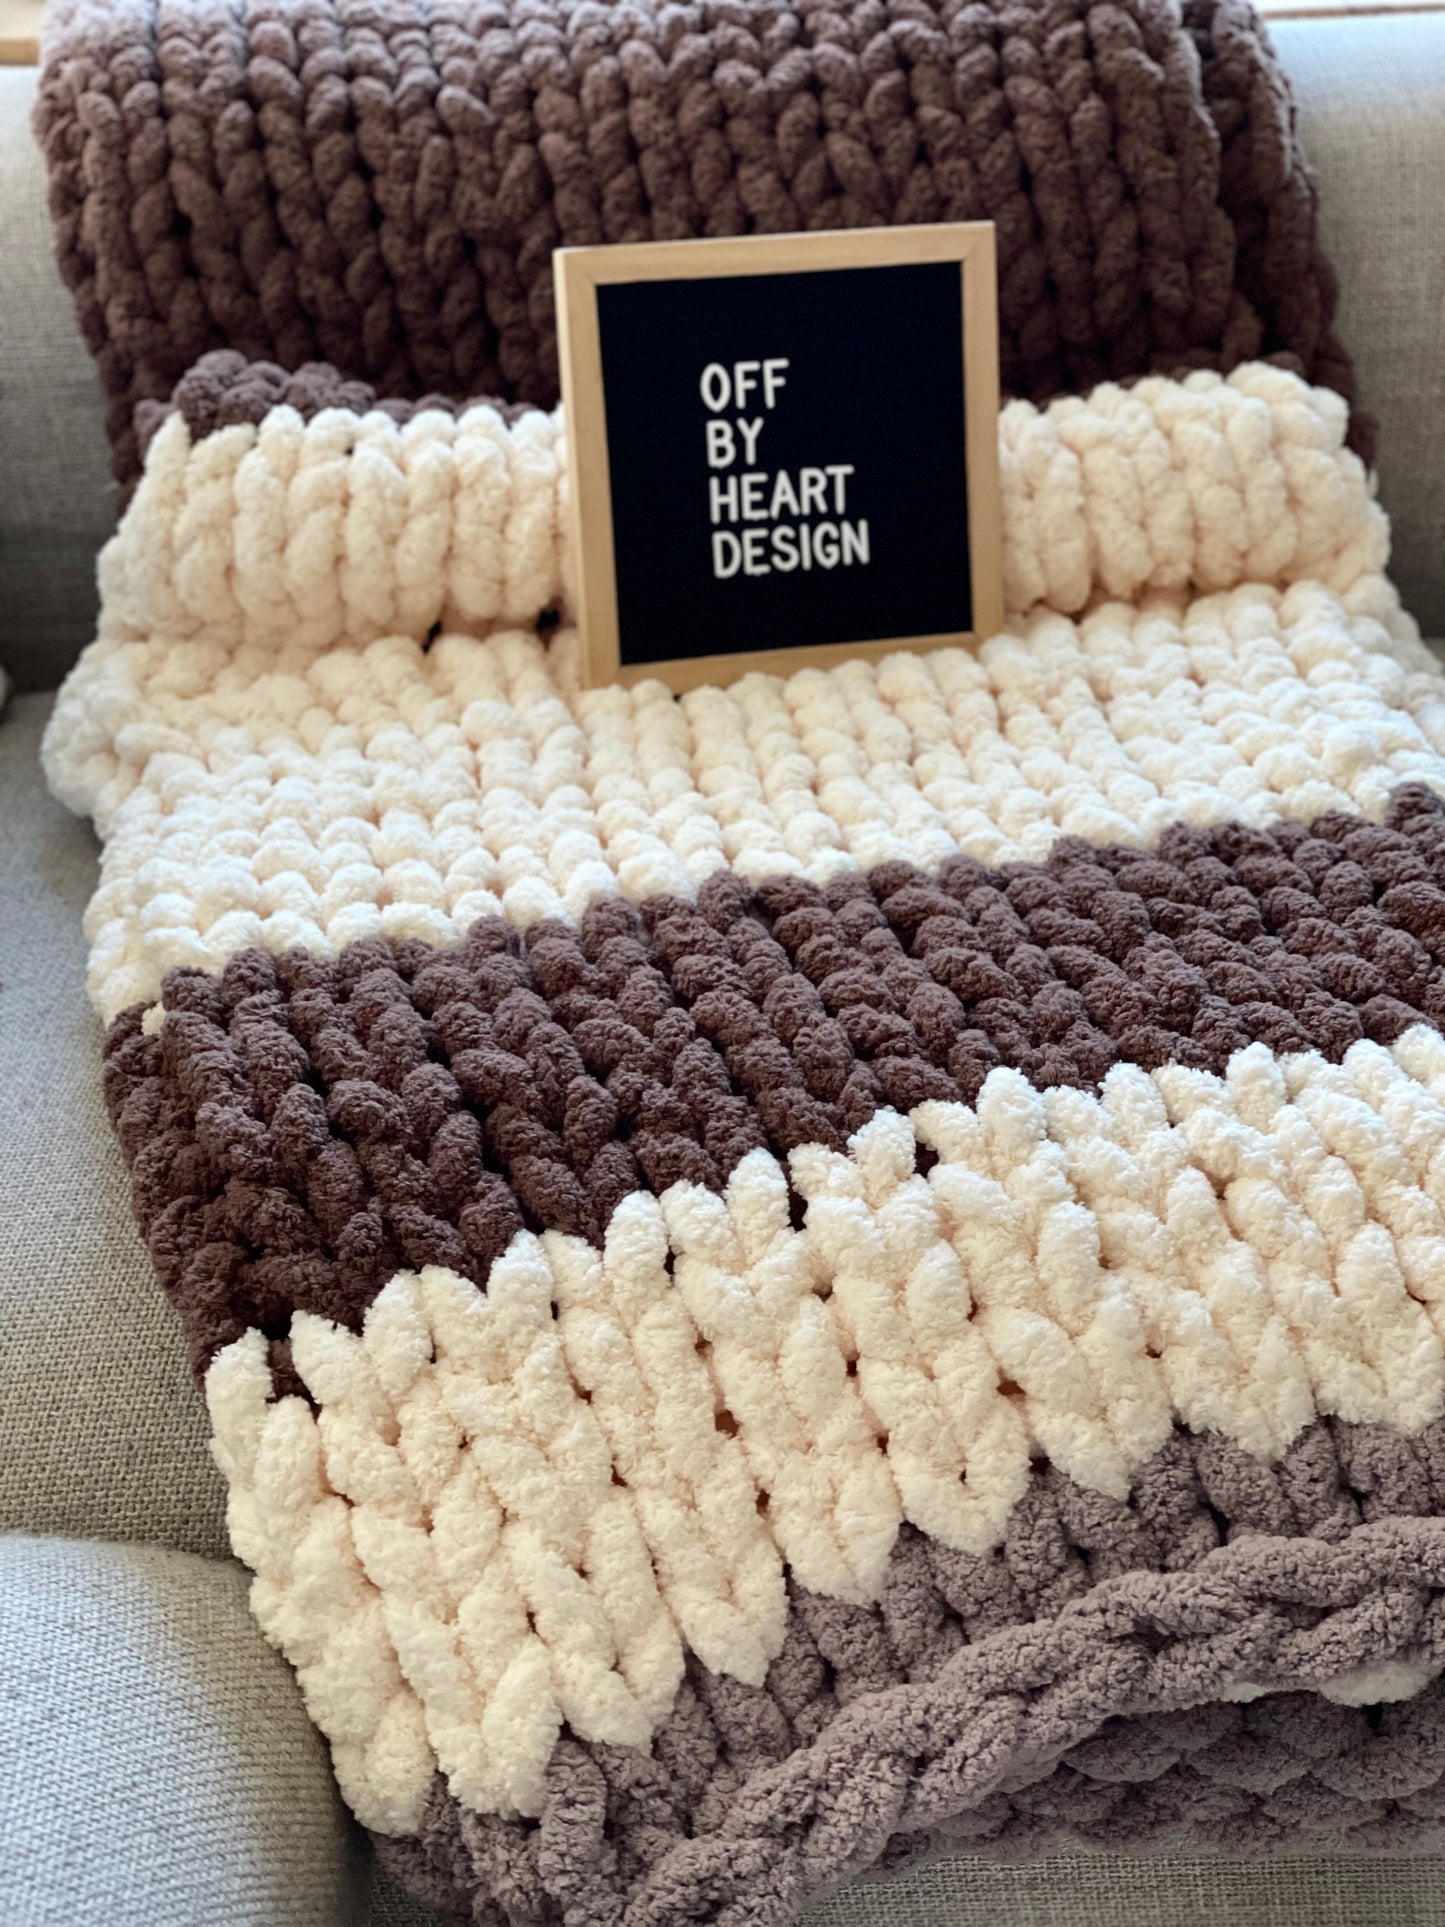 Healing Hand, Chunky Knit Blanket - The Northern